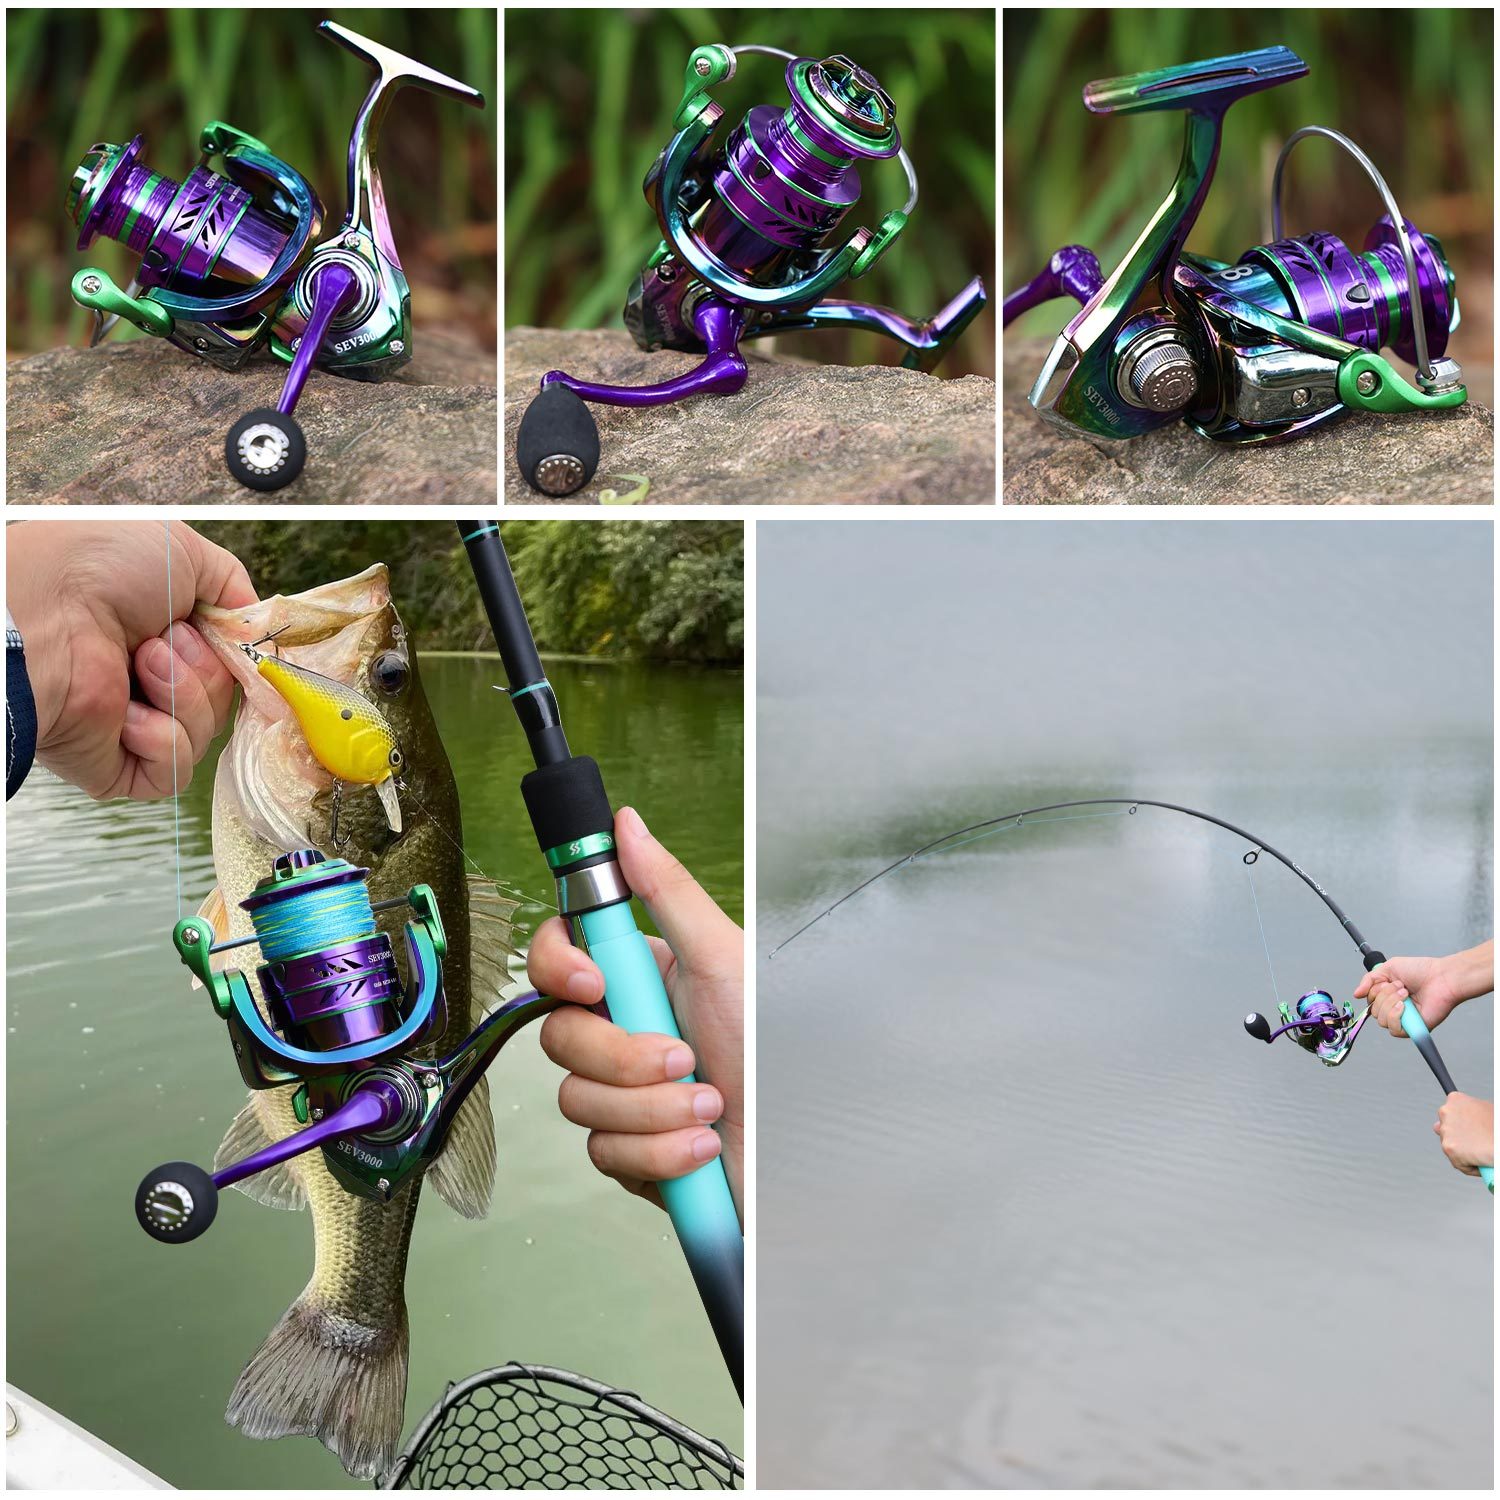 Sougayilang Multicolor Spinning Fishing Reels 1000~5000 Series 5.0/4.7:1  Gear Ratio Spinning Reel Max Drag 15Lbs for Bass Pike